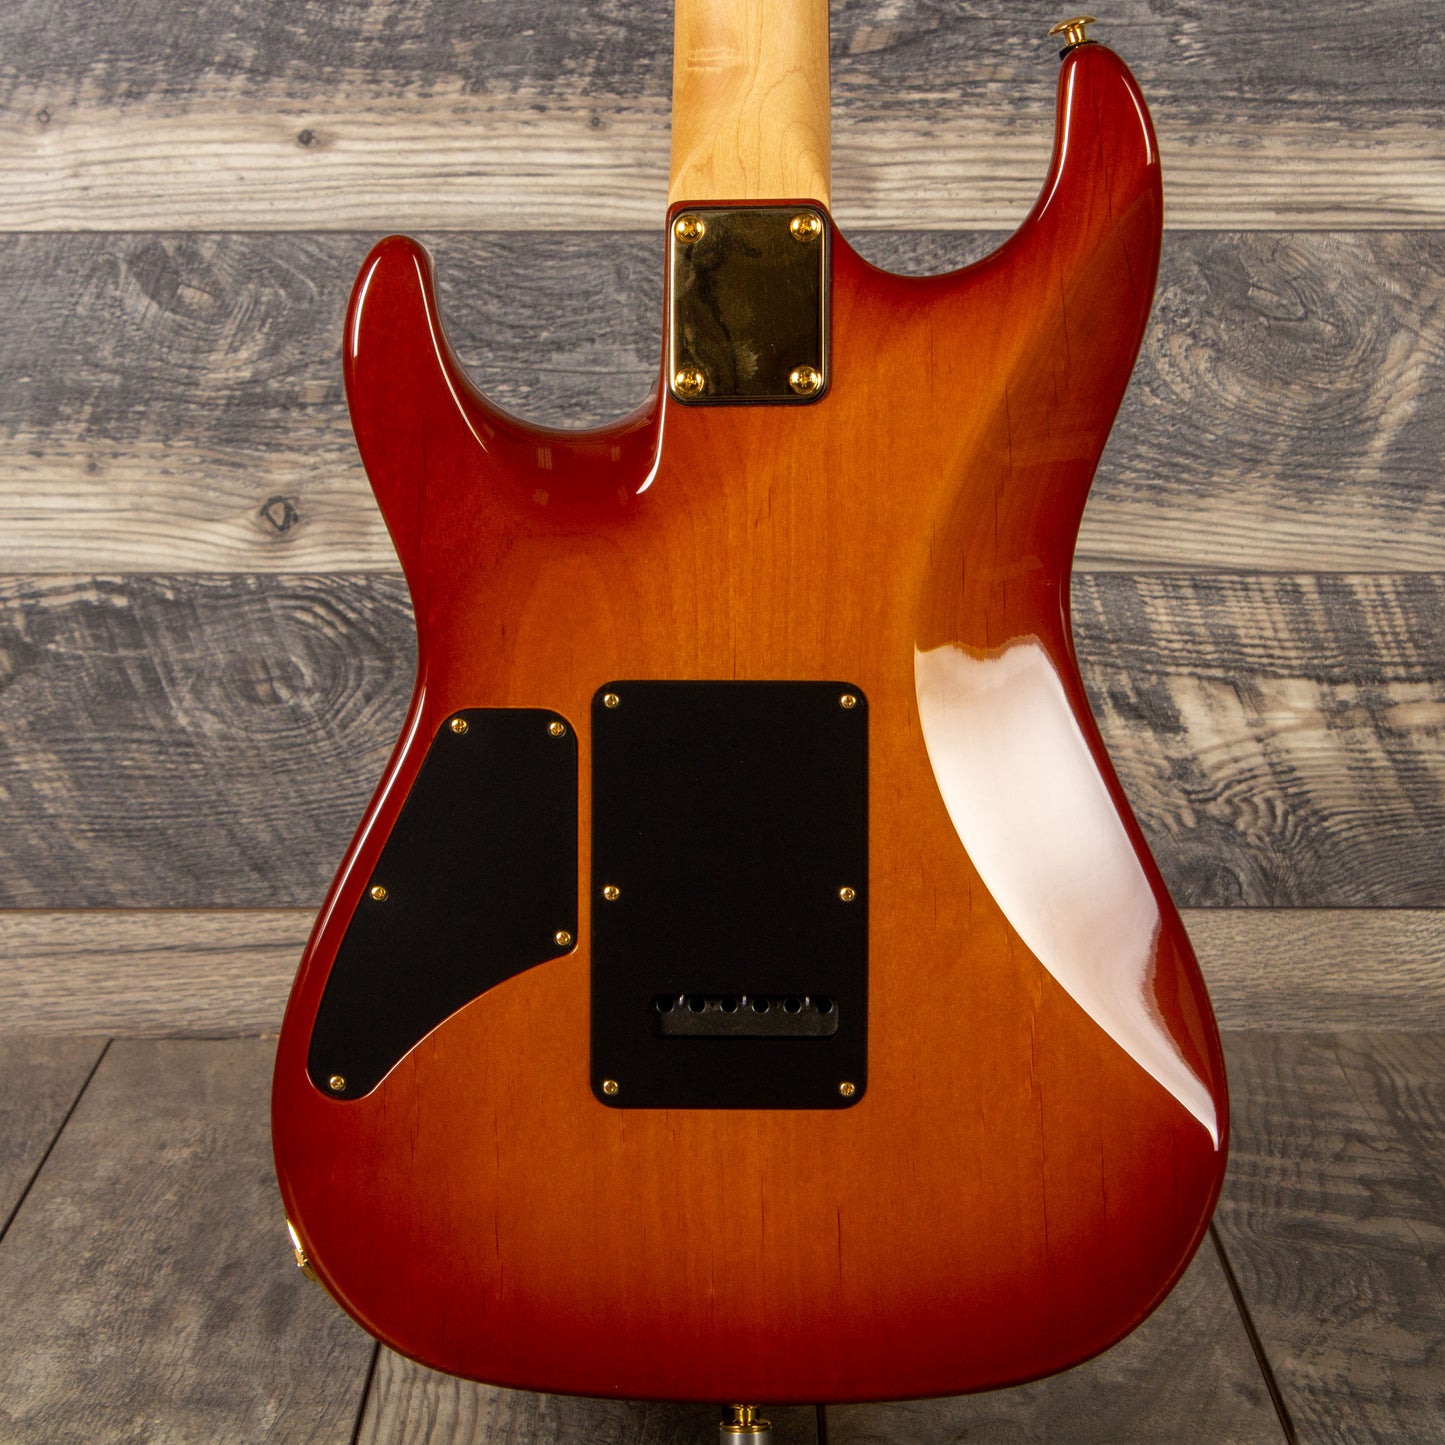 2002 Suhr Standard, Chambered - Honey Burst, Special order with Sperzels and Kinmans!